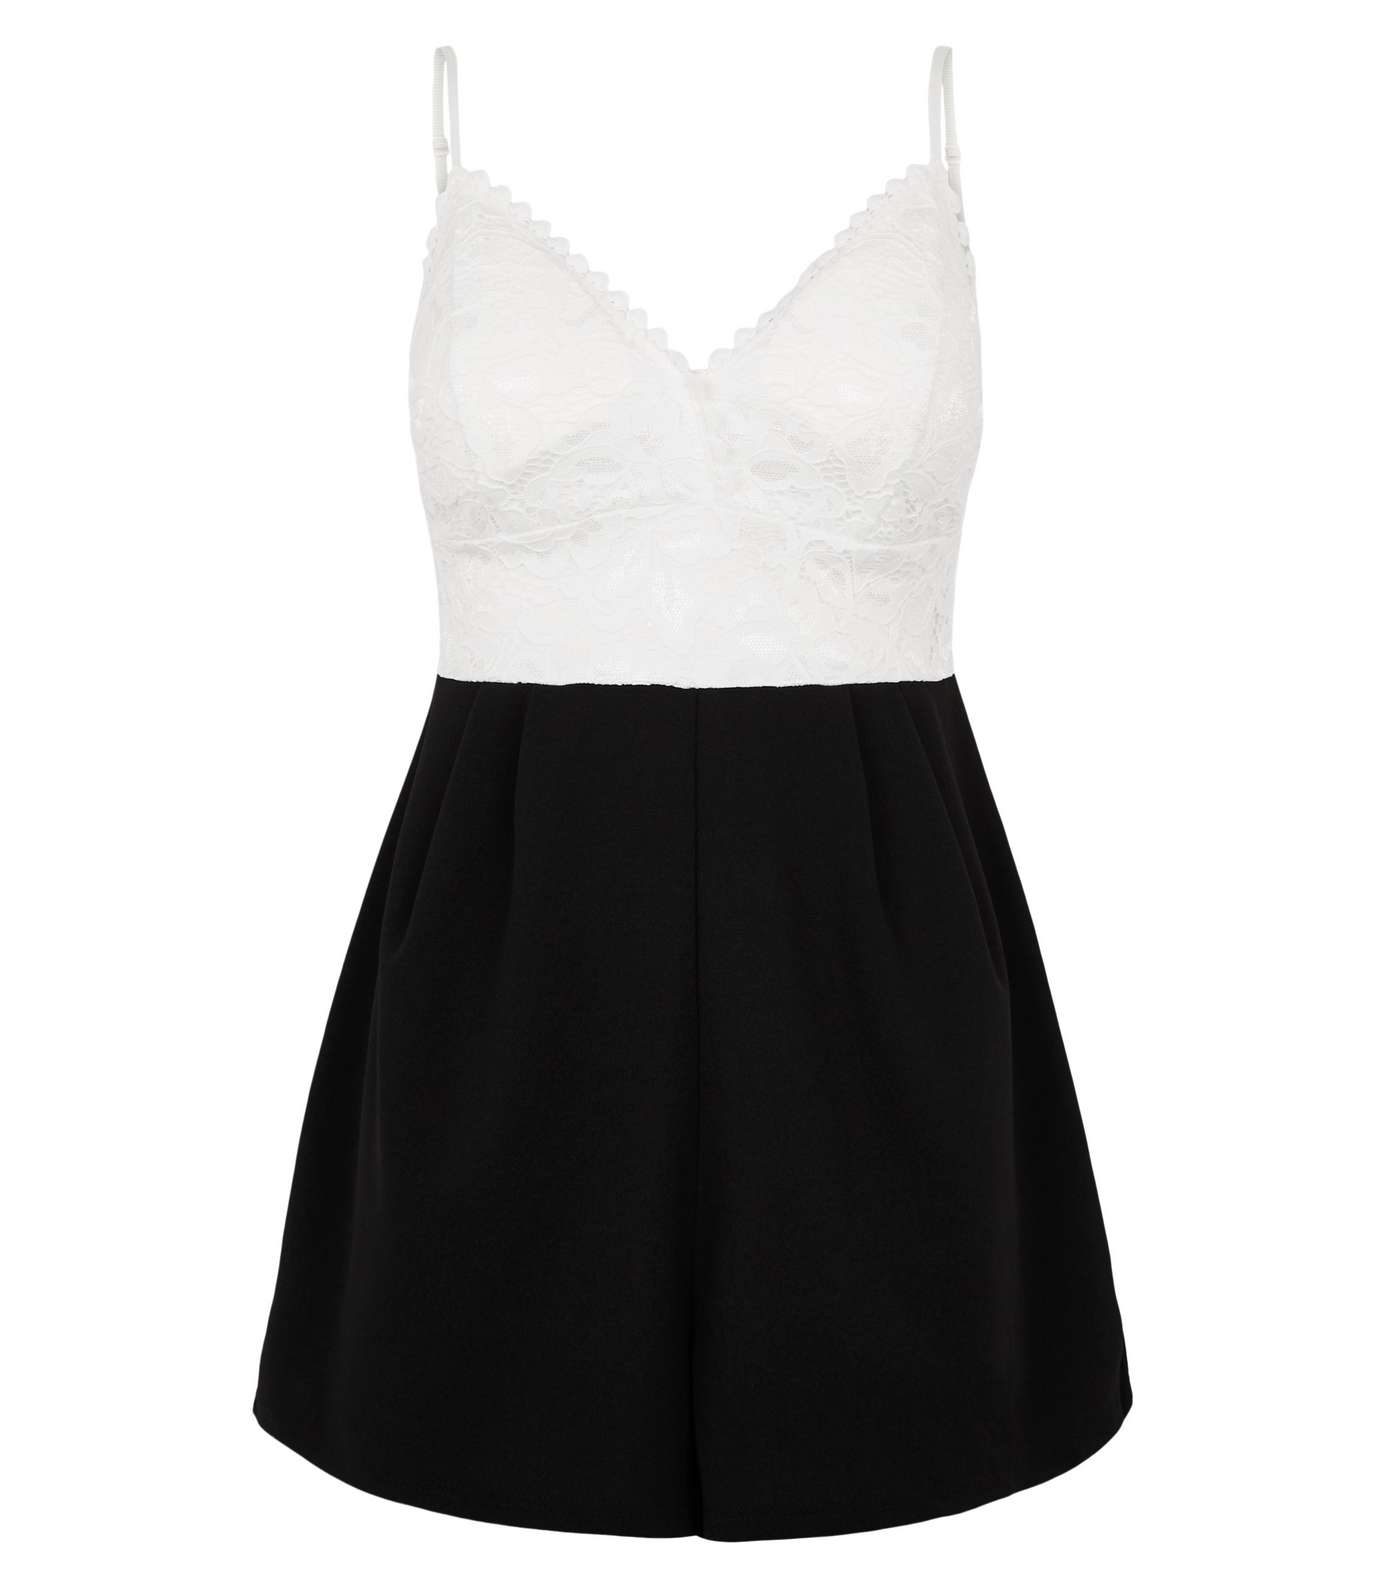 White and Black Lace Top Playsuit Image 4